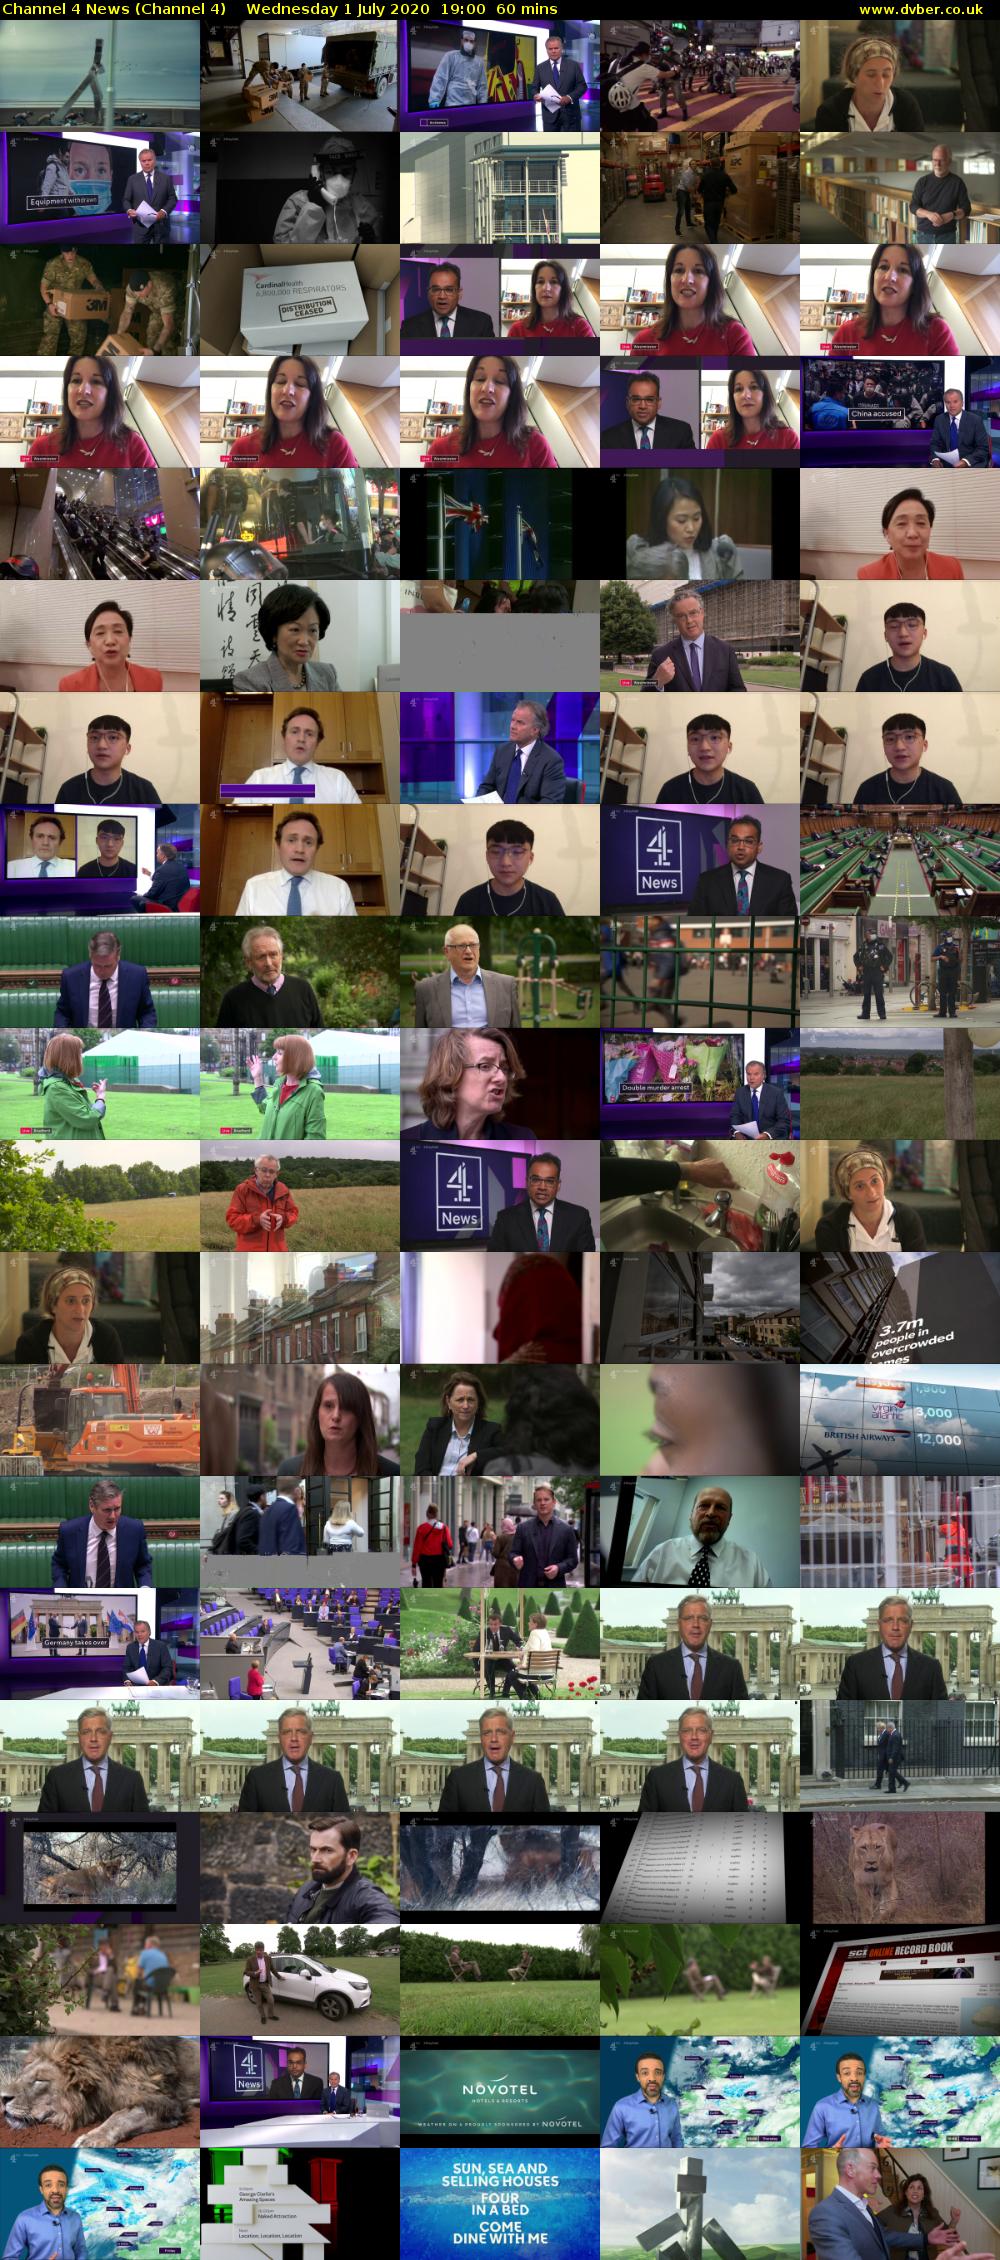 Channel 4 News (Channel 4) Wednesday 1 July 2020 19:00 - 20:00